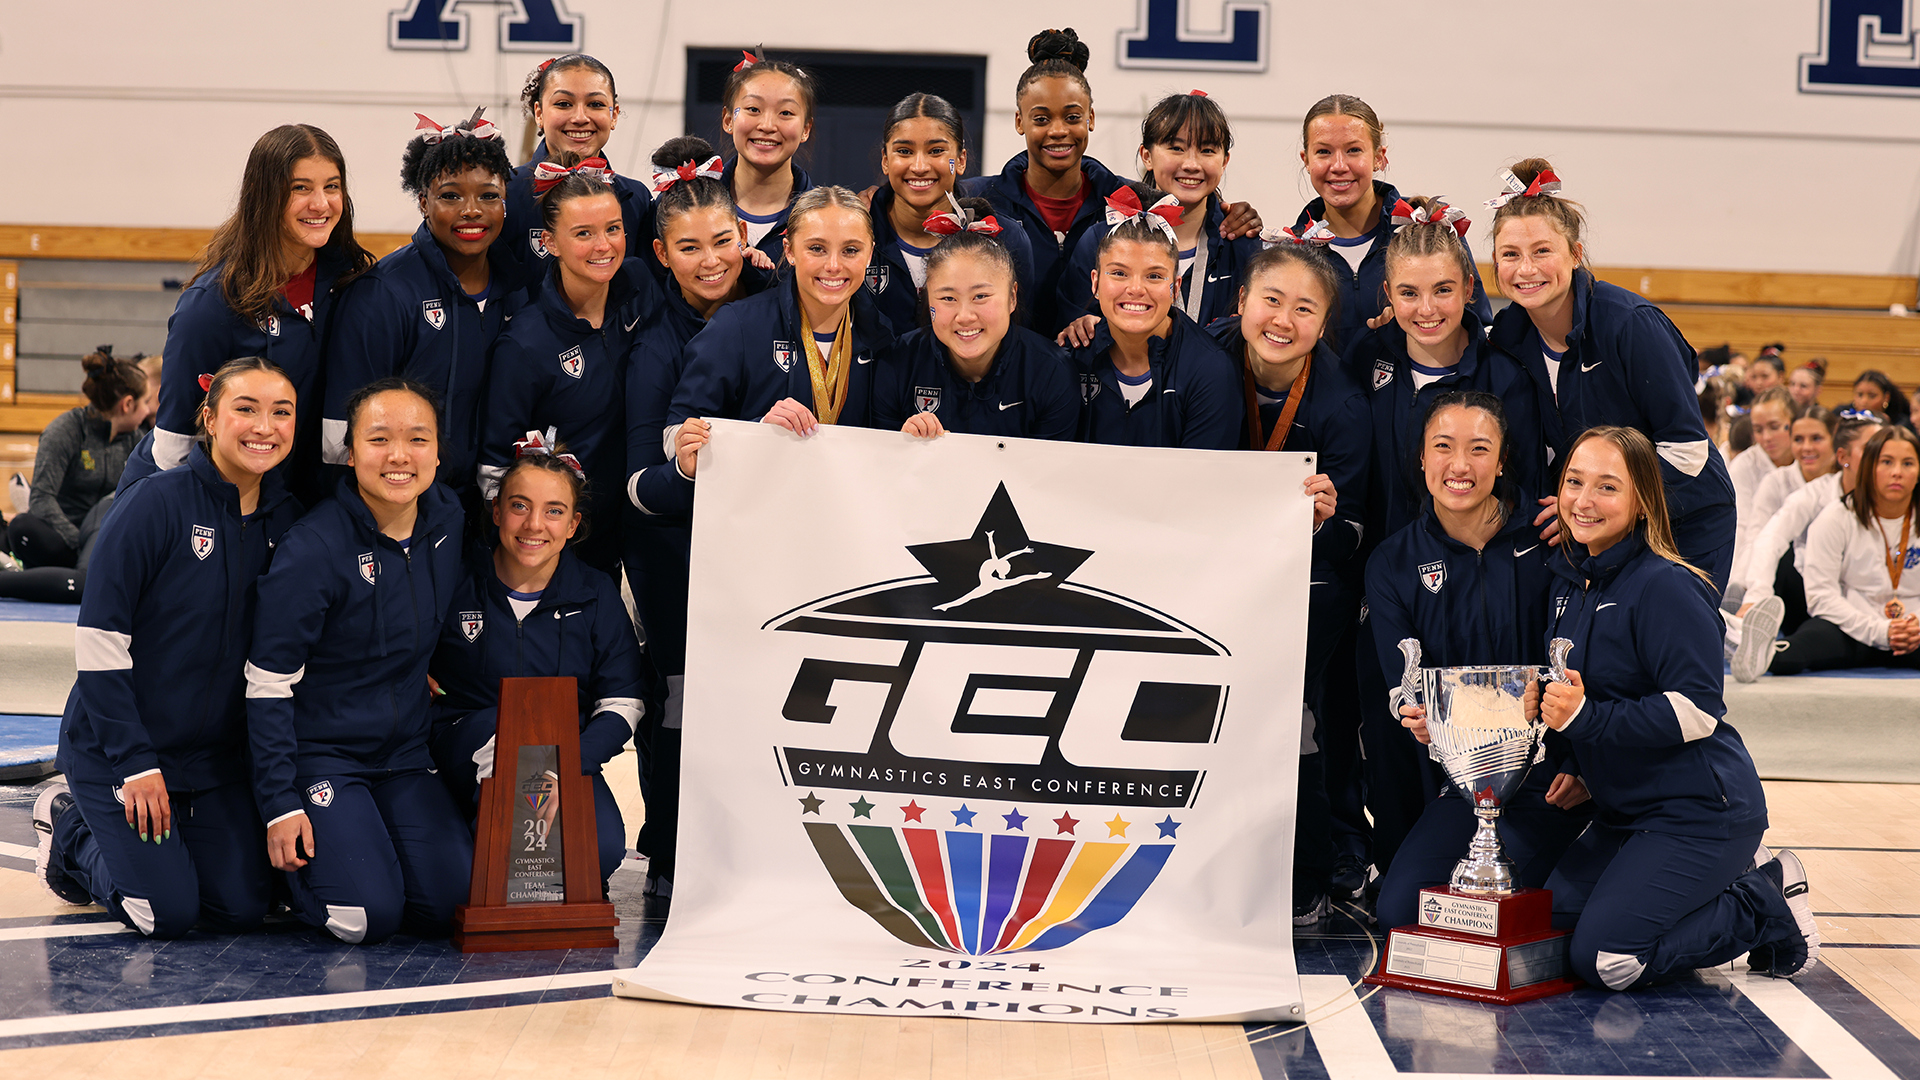 Members of the gymnastics team pose with the championship banner after the GEC Championships.